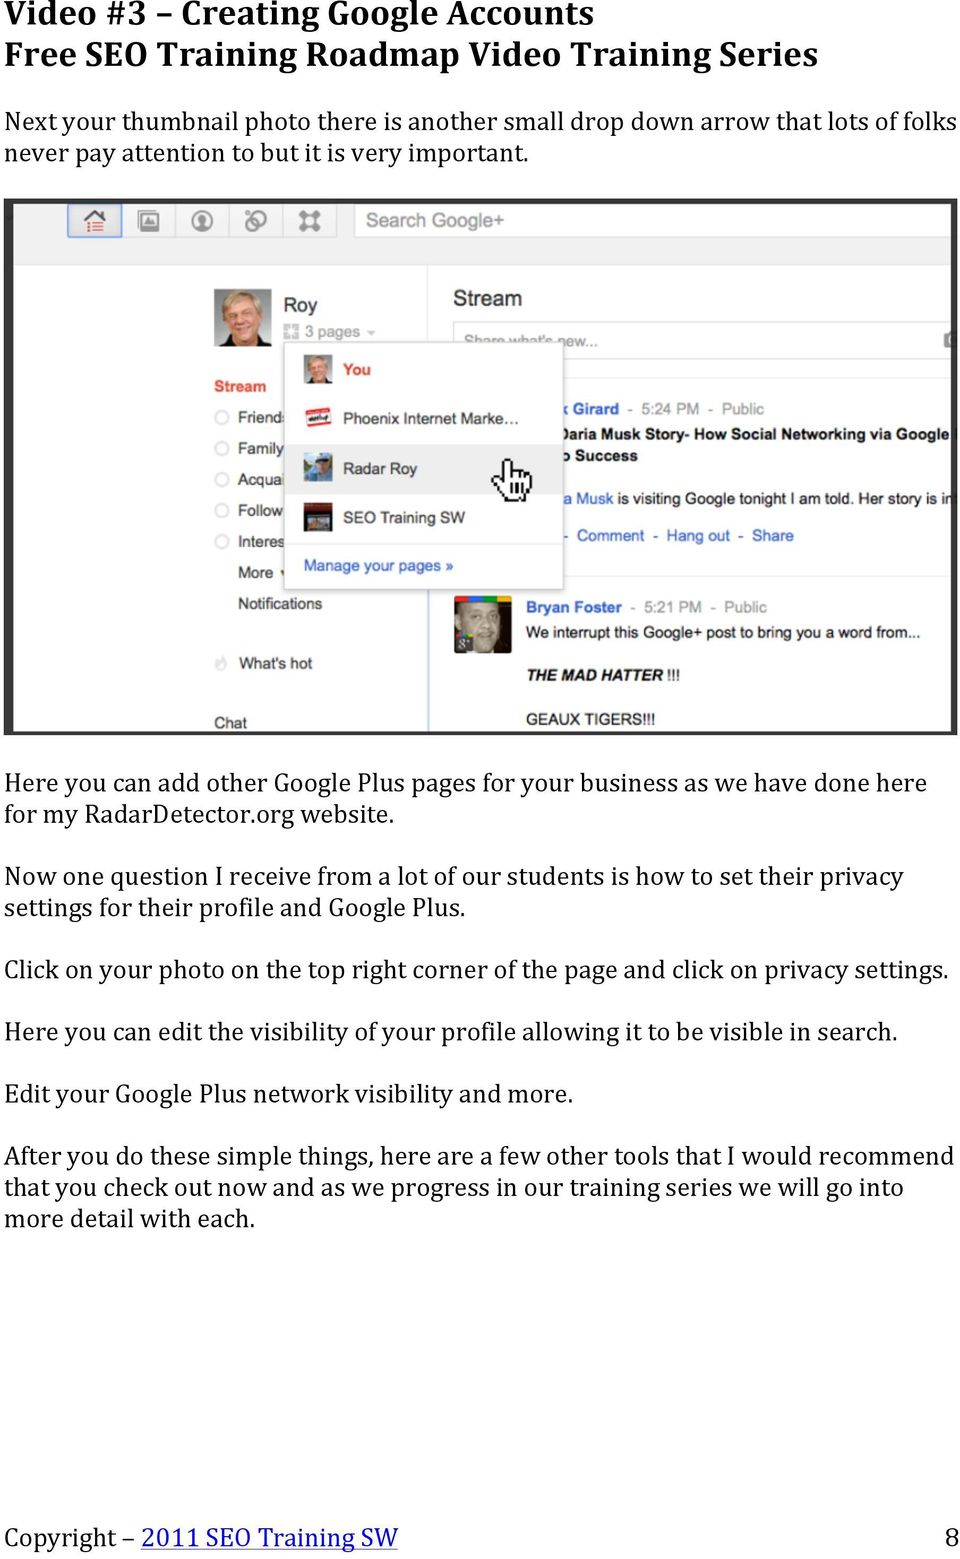 Now one question I receive from a lot of our students is how to set their privacy settings for their profile and Google Plus.